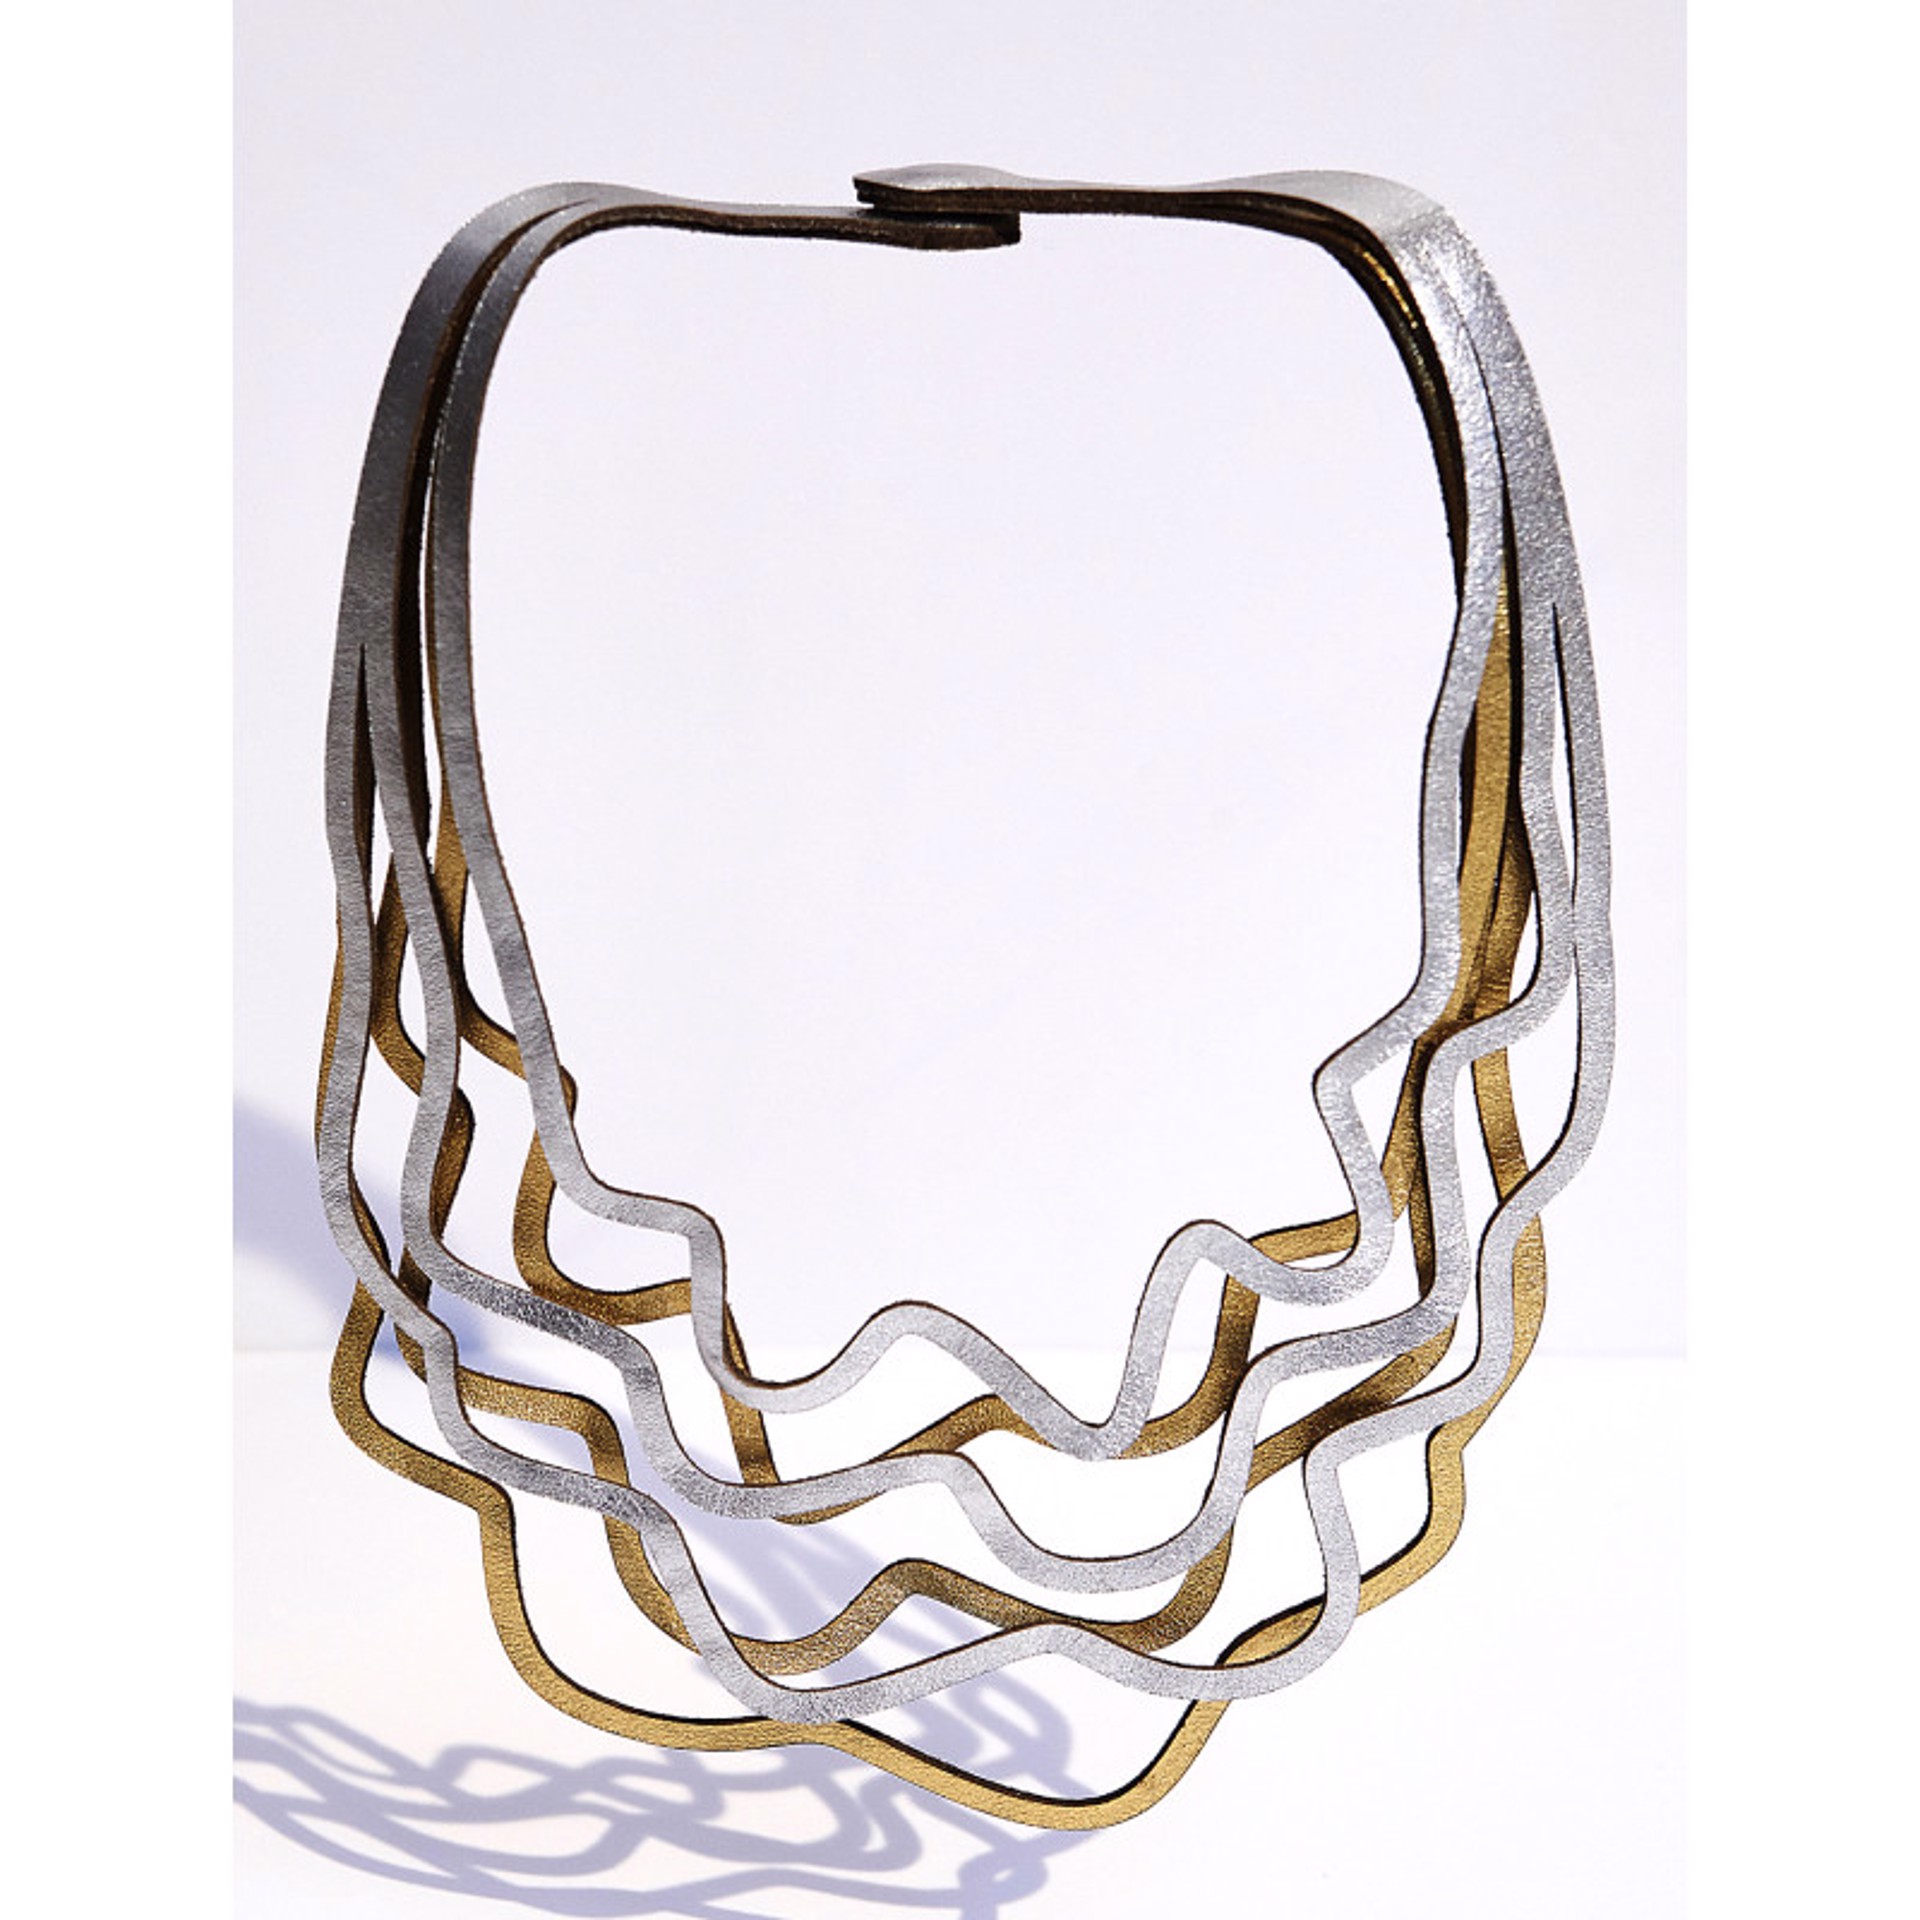 Curves Duo Necklace Lrg Silver-Gold by ISKIN Nikaia Inc.